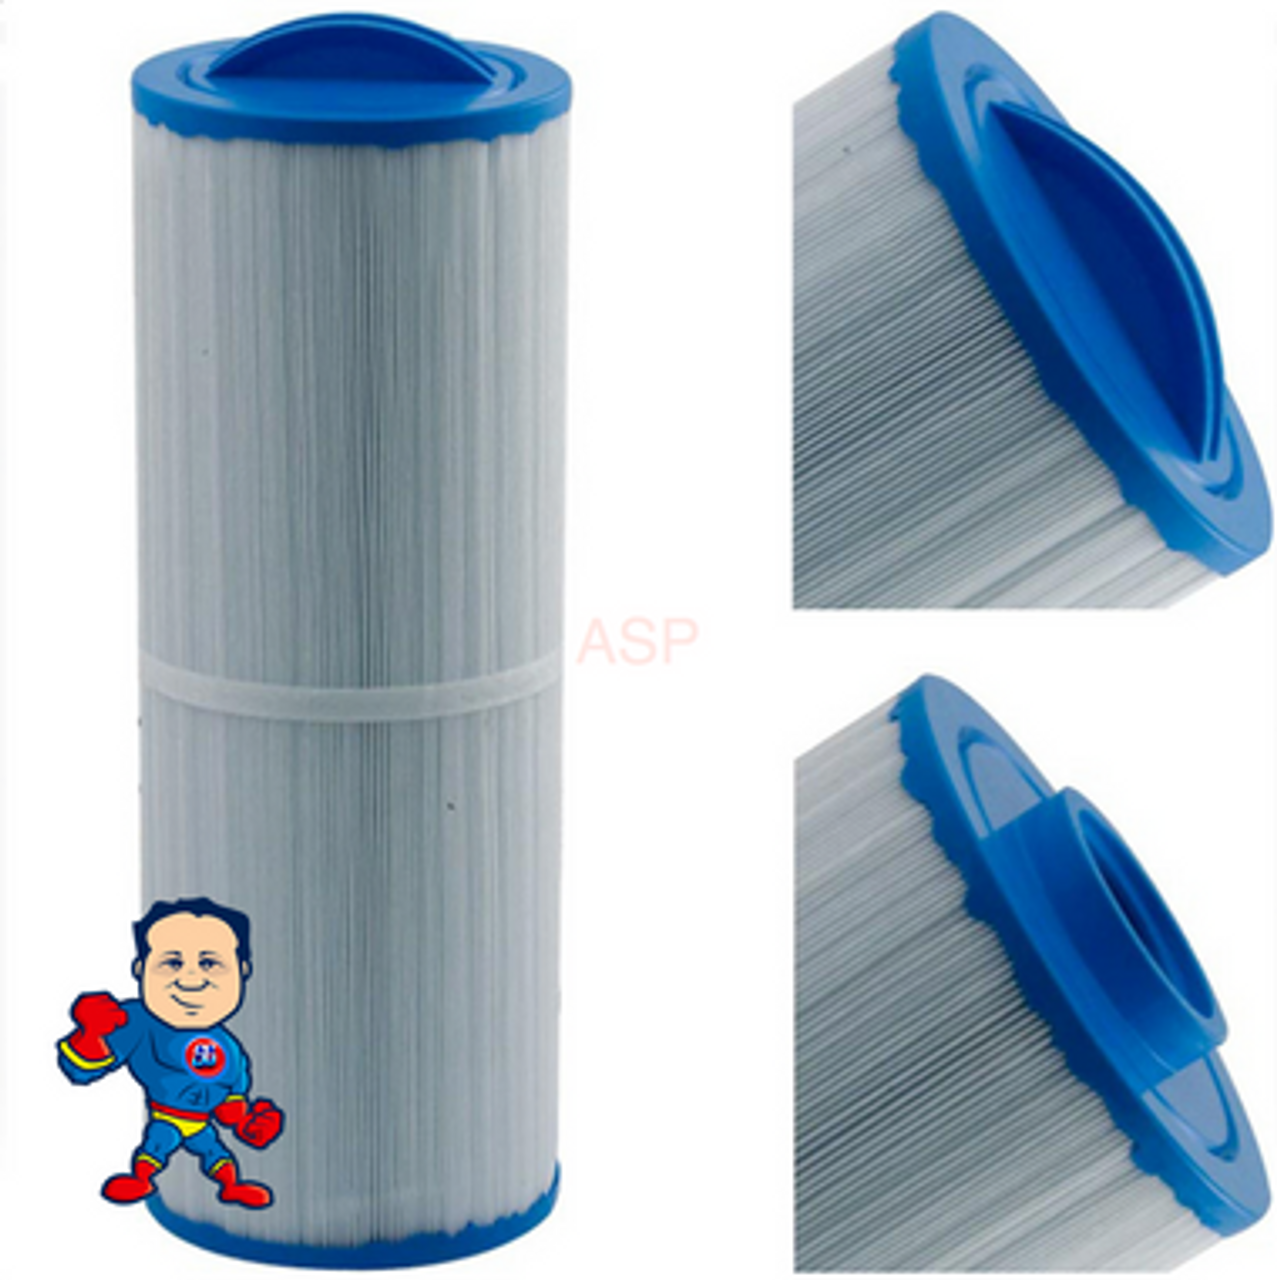 Filter, Cartridge, 50sqft,  2"female SAE Thread, 4-15/16", 13-1/2", Fits Some Four Winds Spas